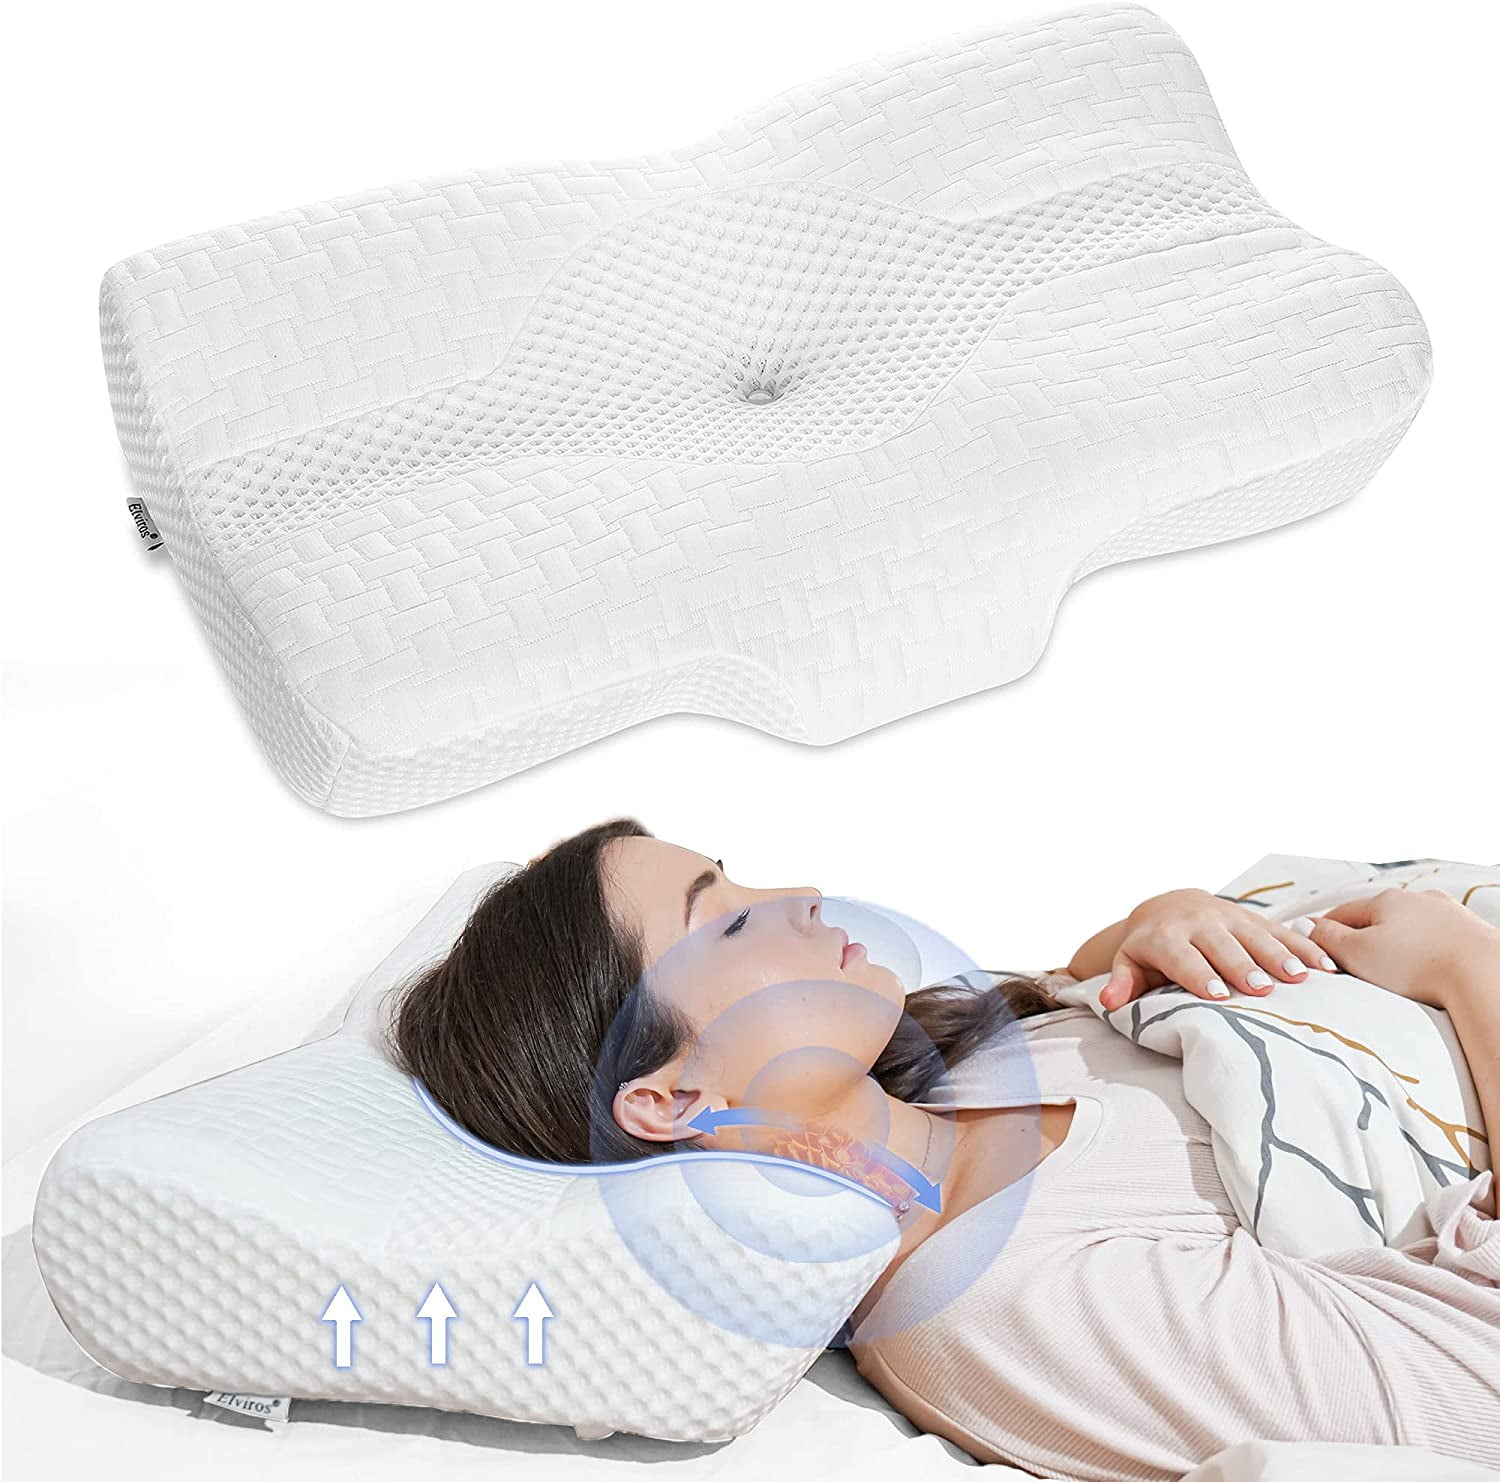 Comfortable Memory Foam Sleep Pillow Contour Cervical Orthopedic Neck Support 